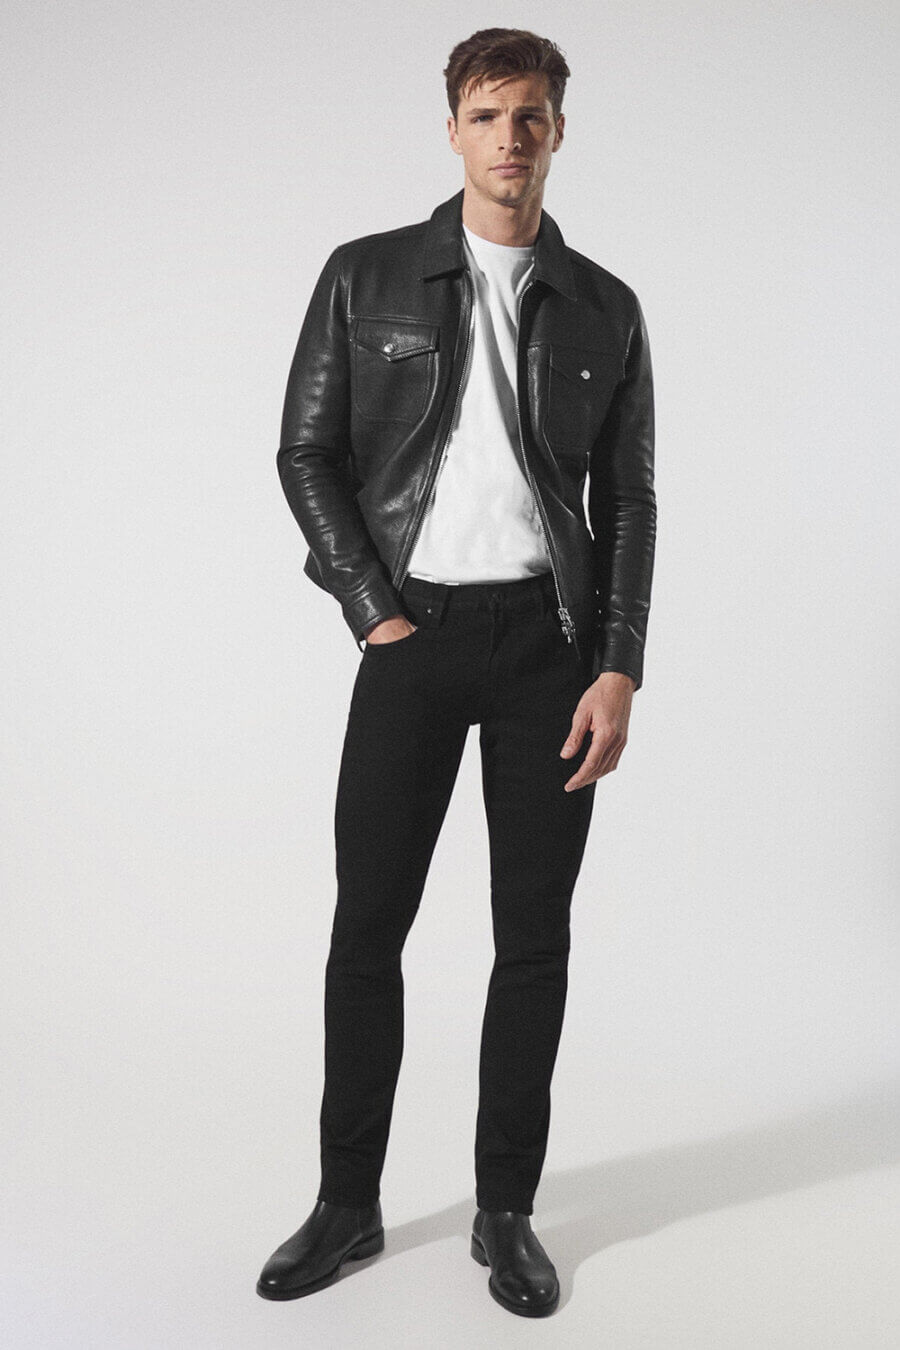 Men's rocker inspired black jeans, white T-shirt and black leather jacket outfit